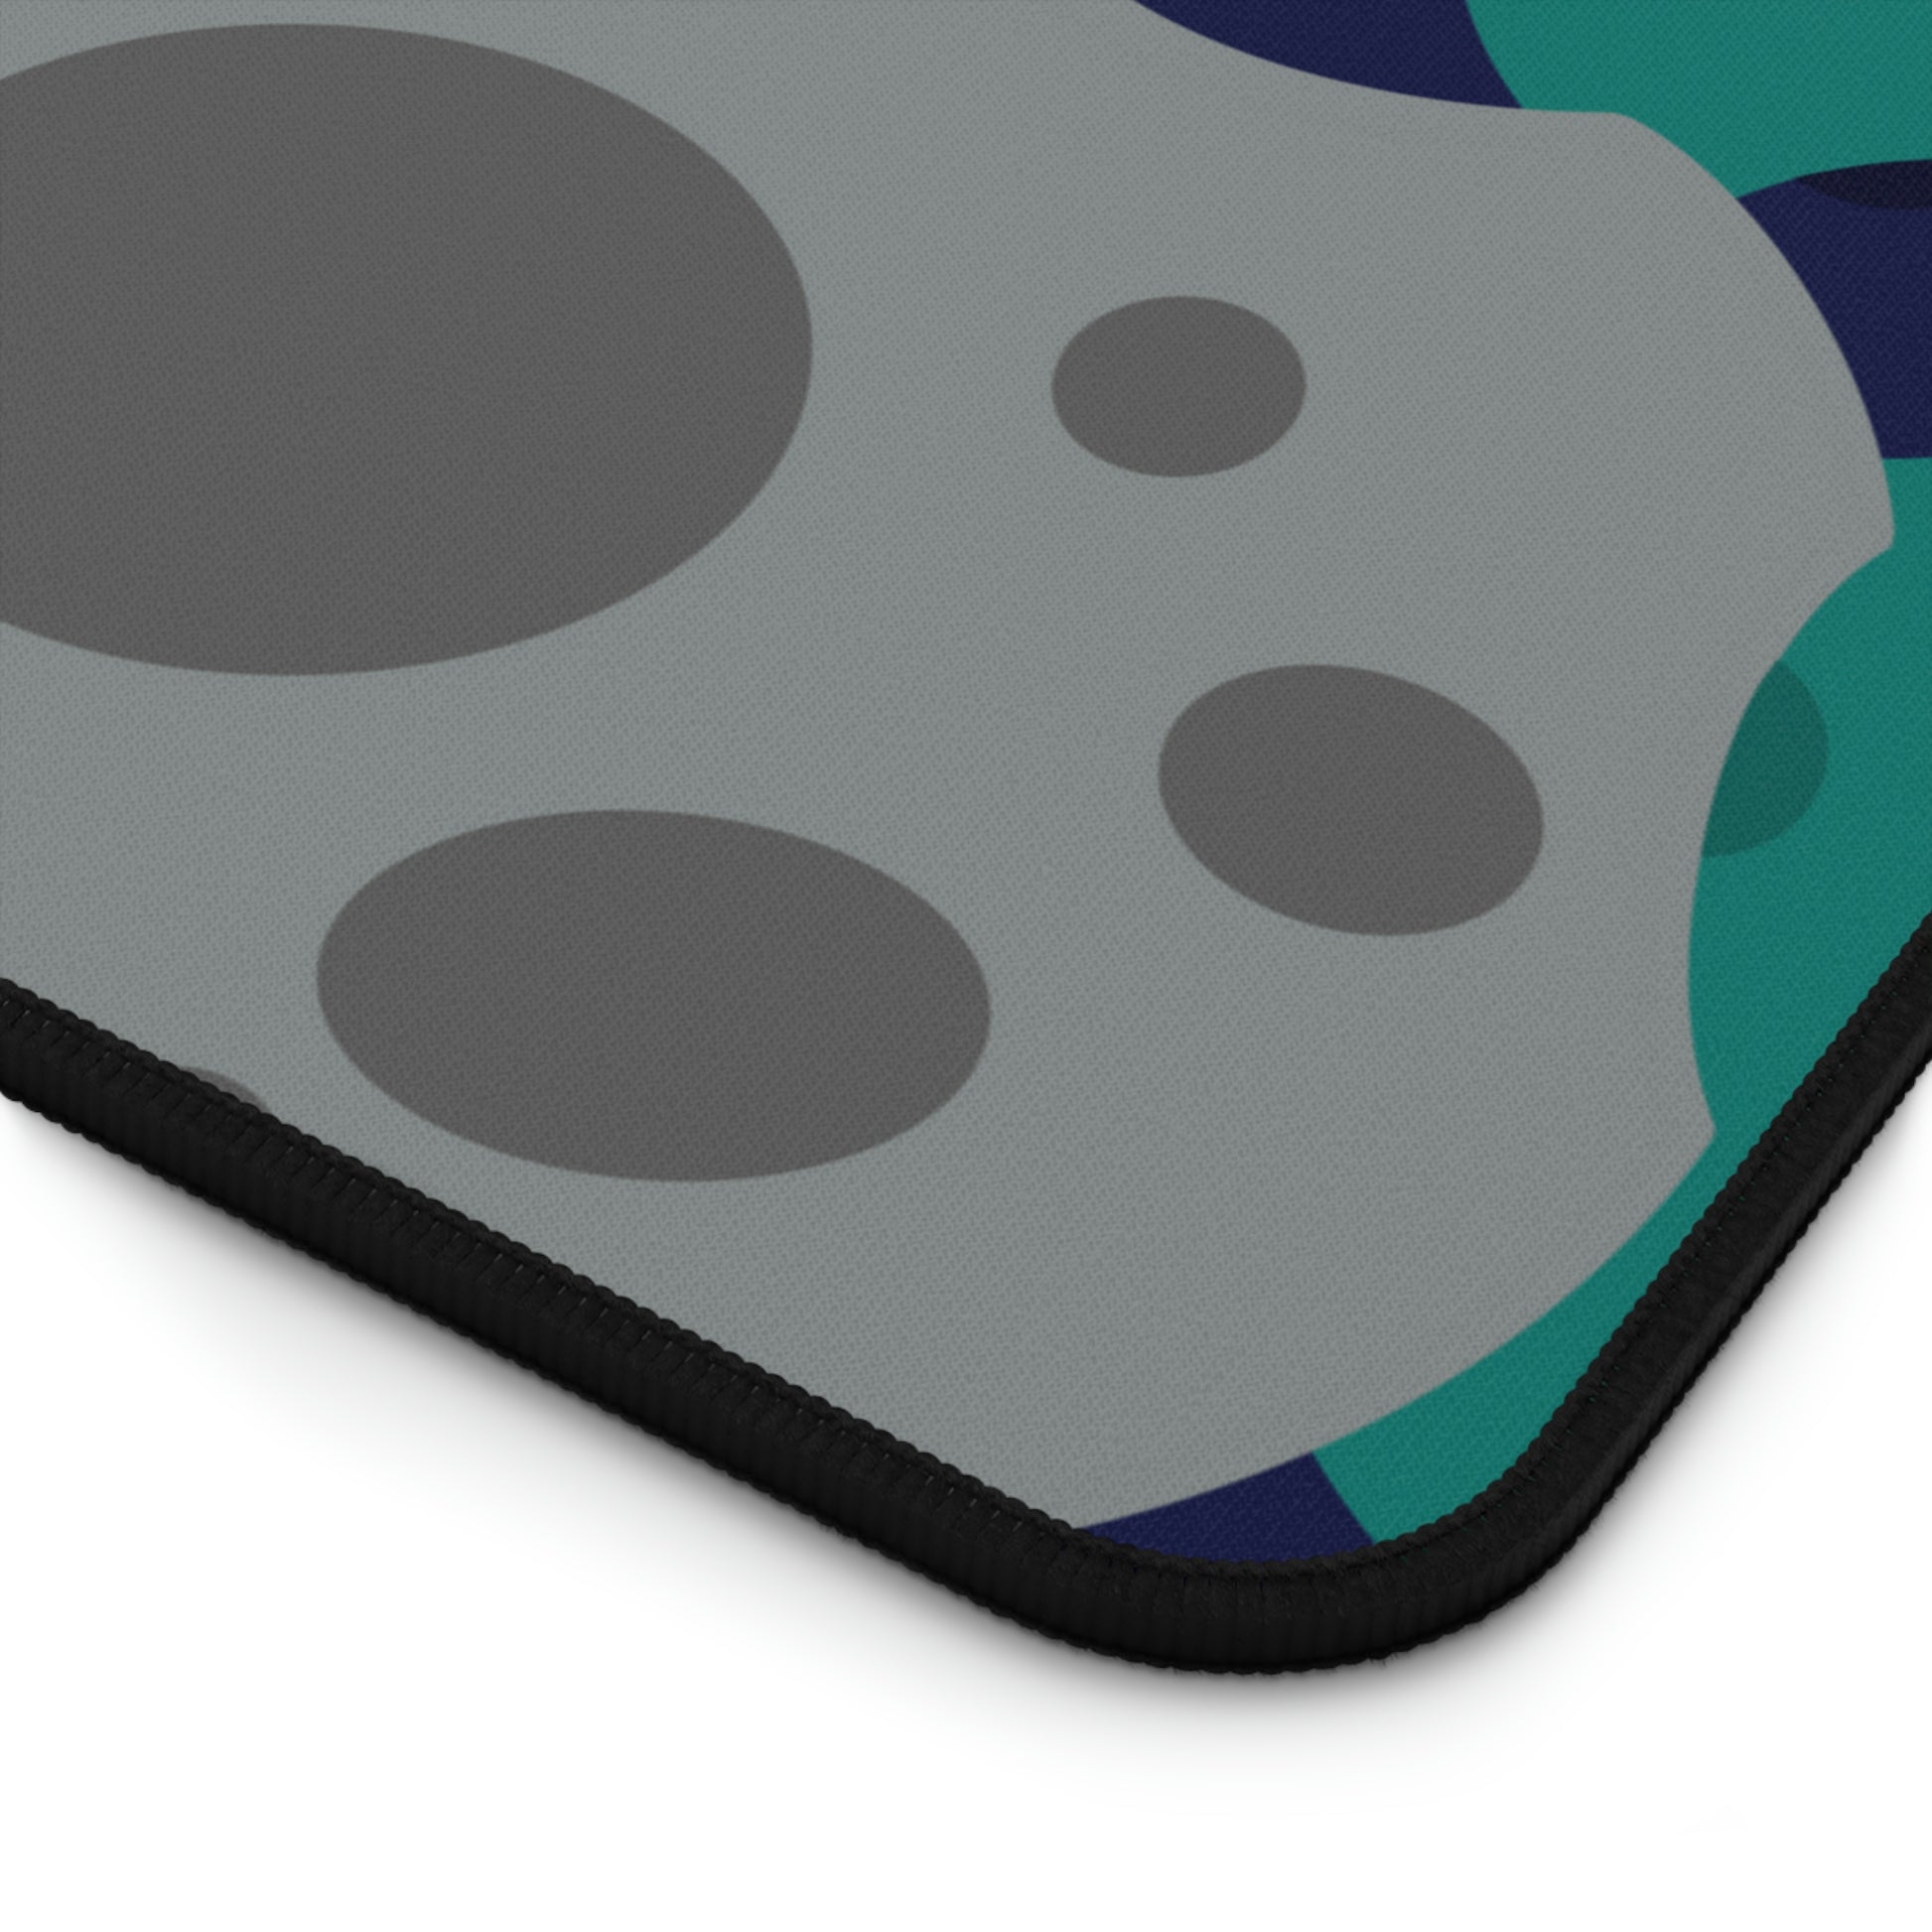 The corner of a 12" x 18" desk mat with gray, teal, and dark blue meteorites.